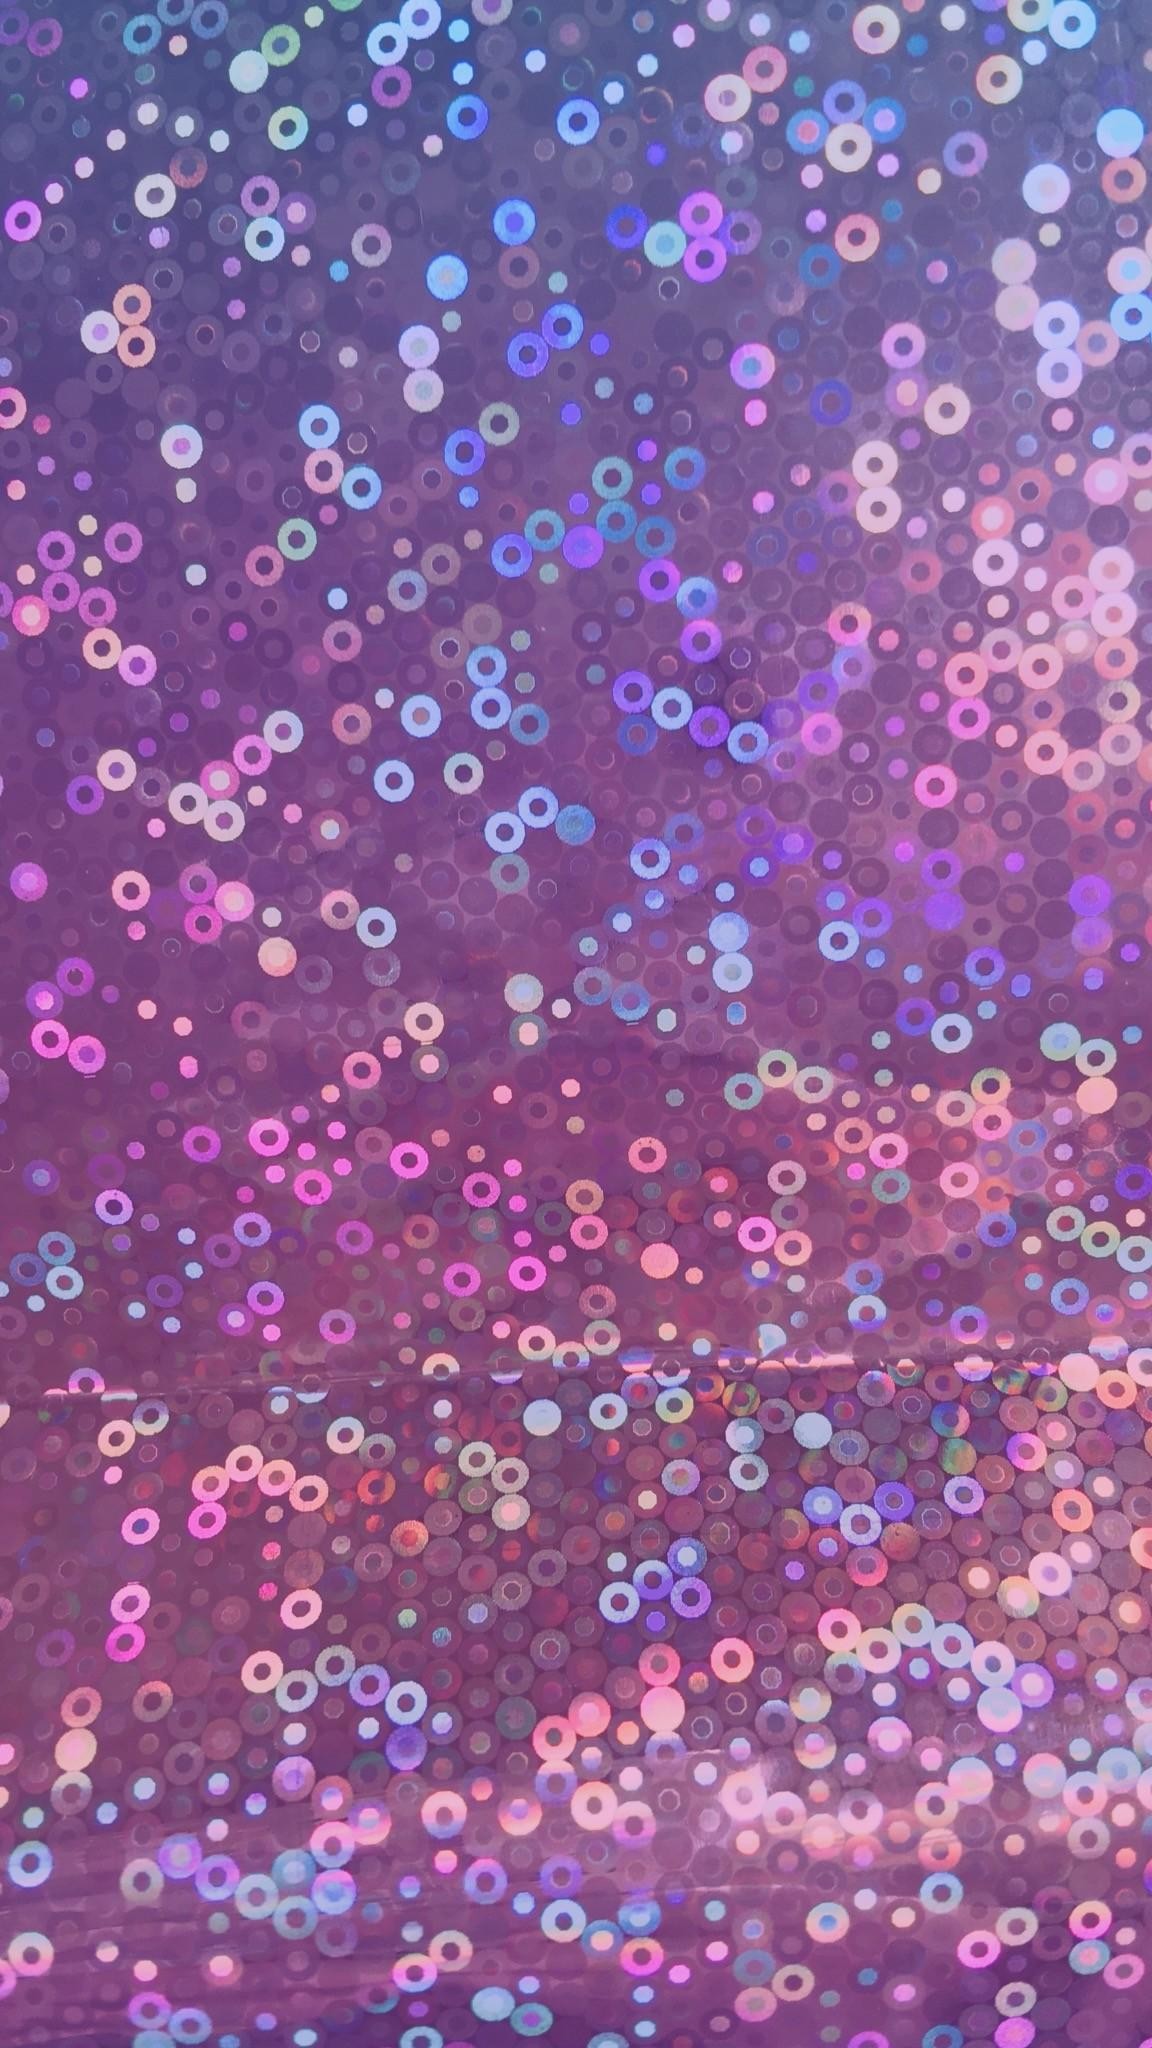 Glitter iPhone Wallpaper (79+ images)